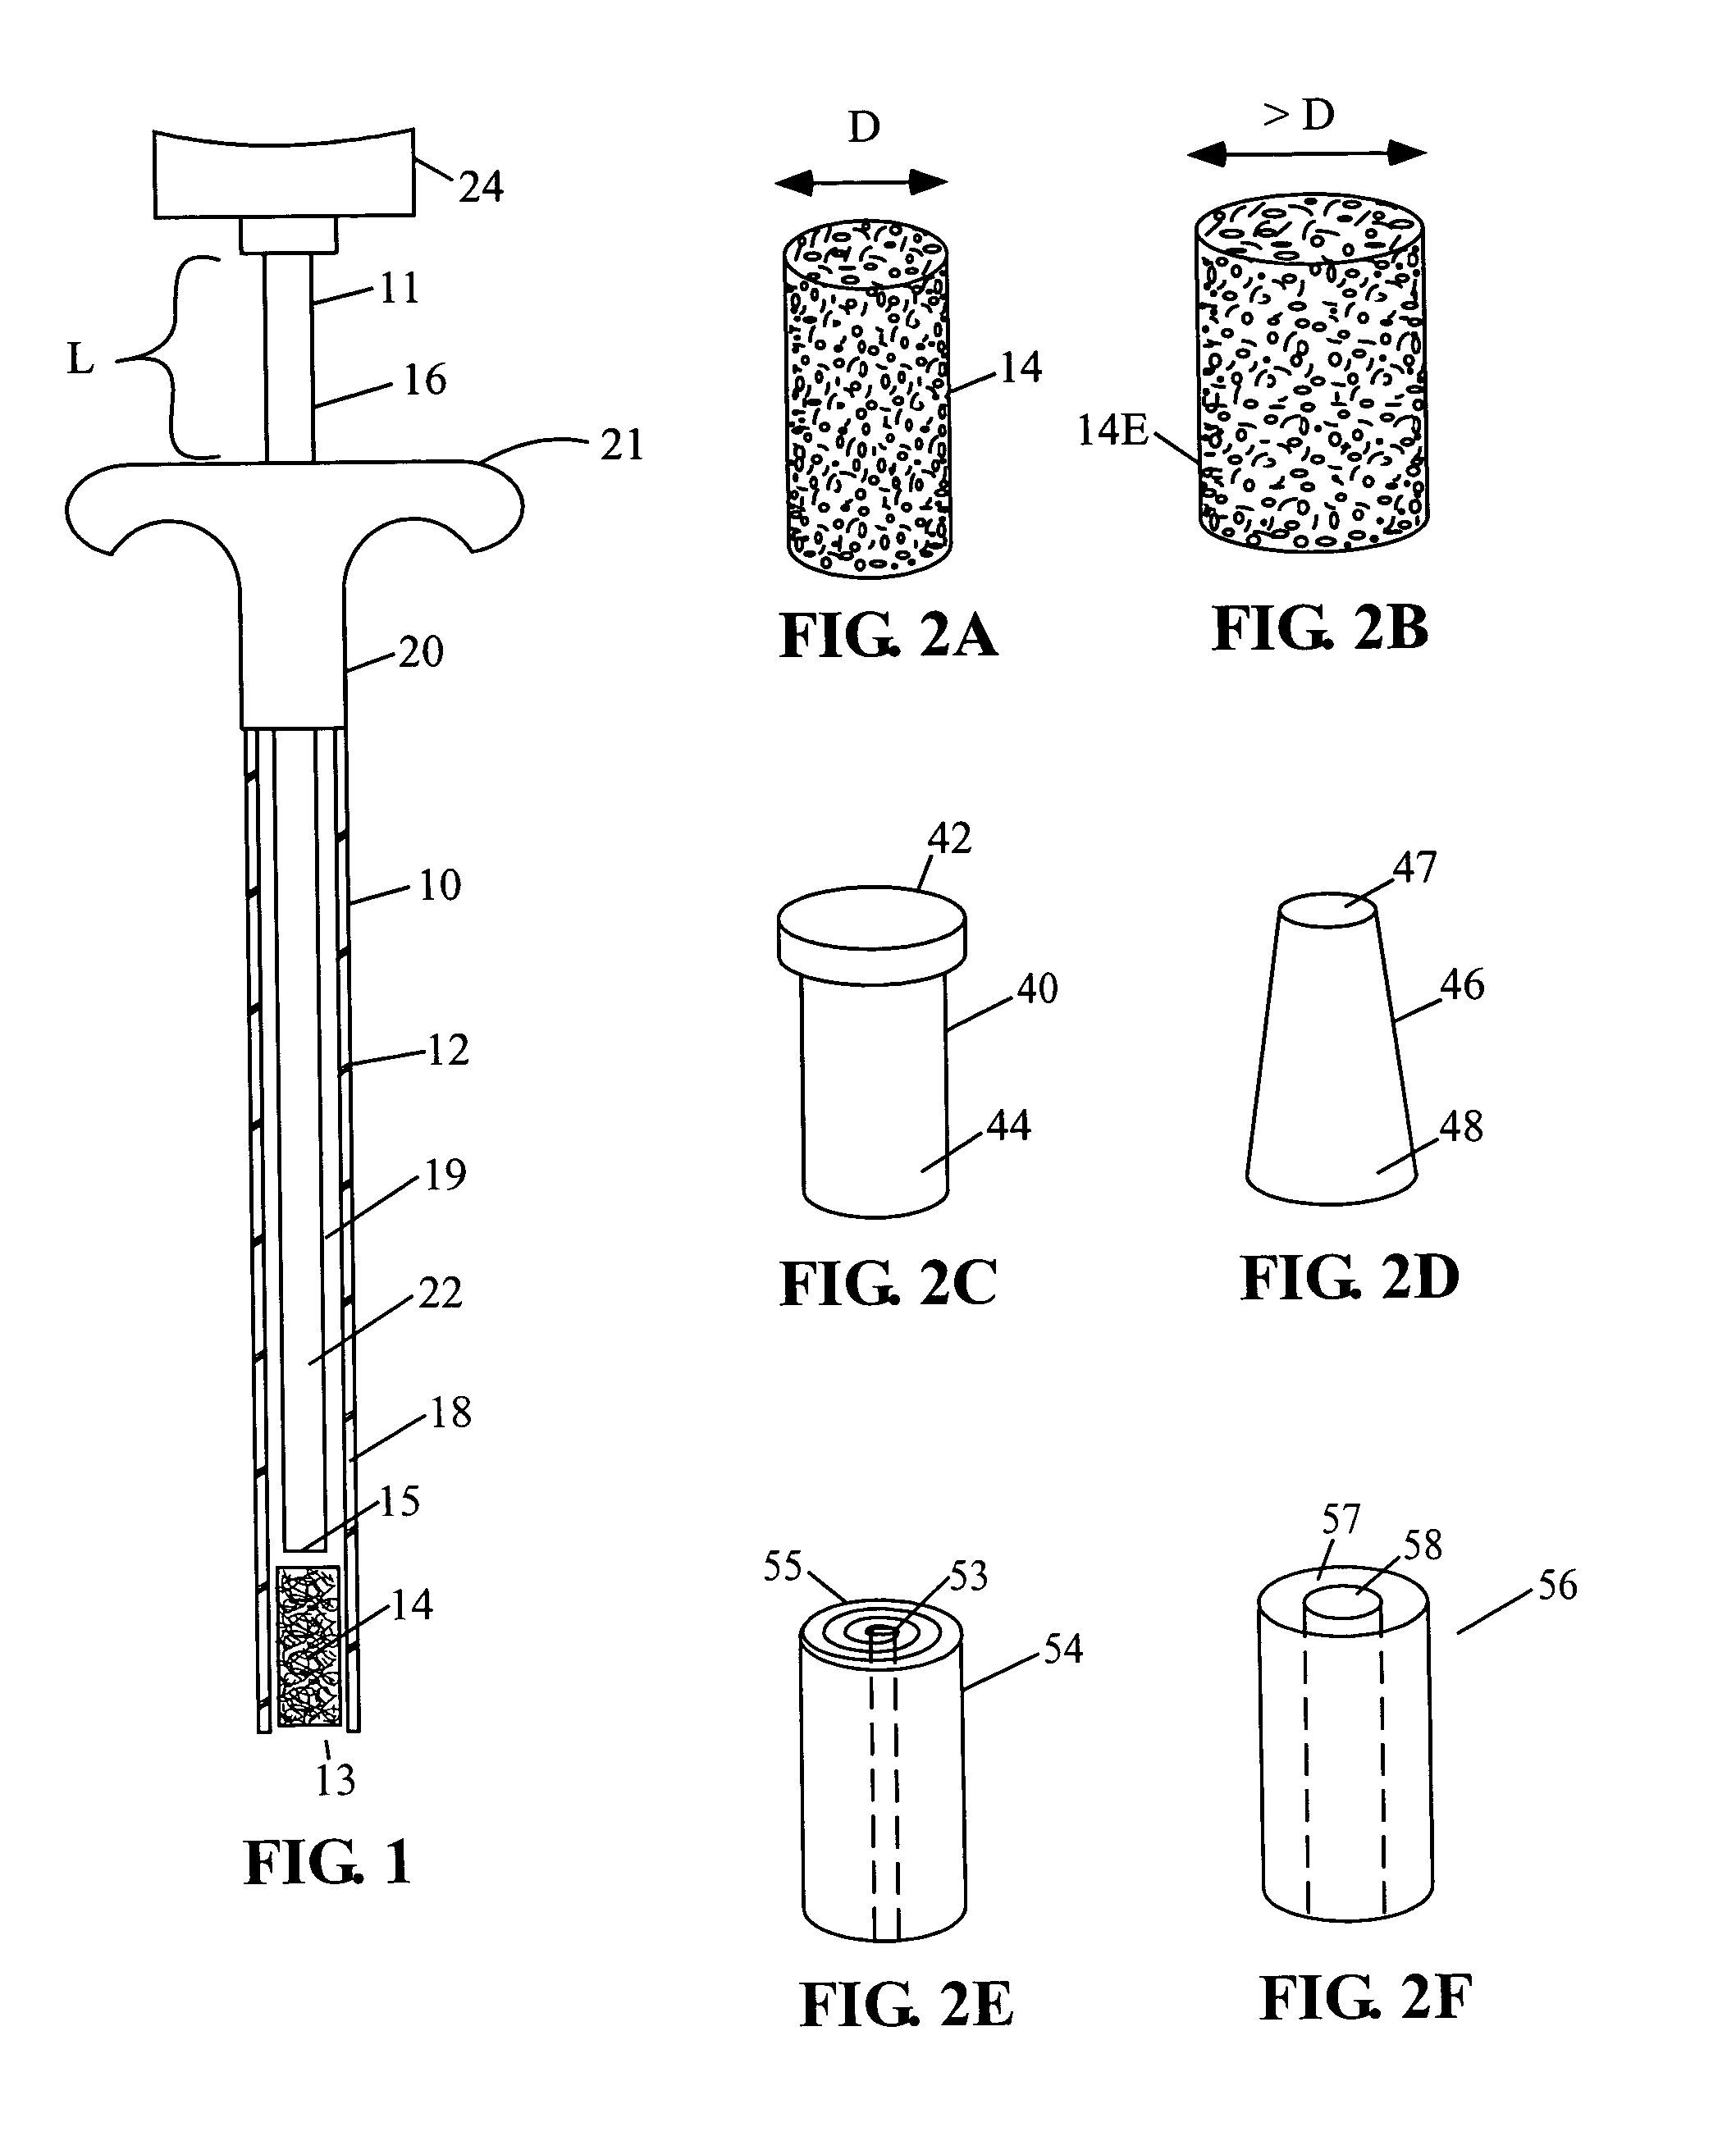 Devices and methods for treating defects in the tissue of a living being